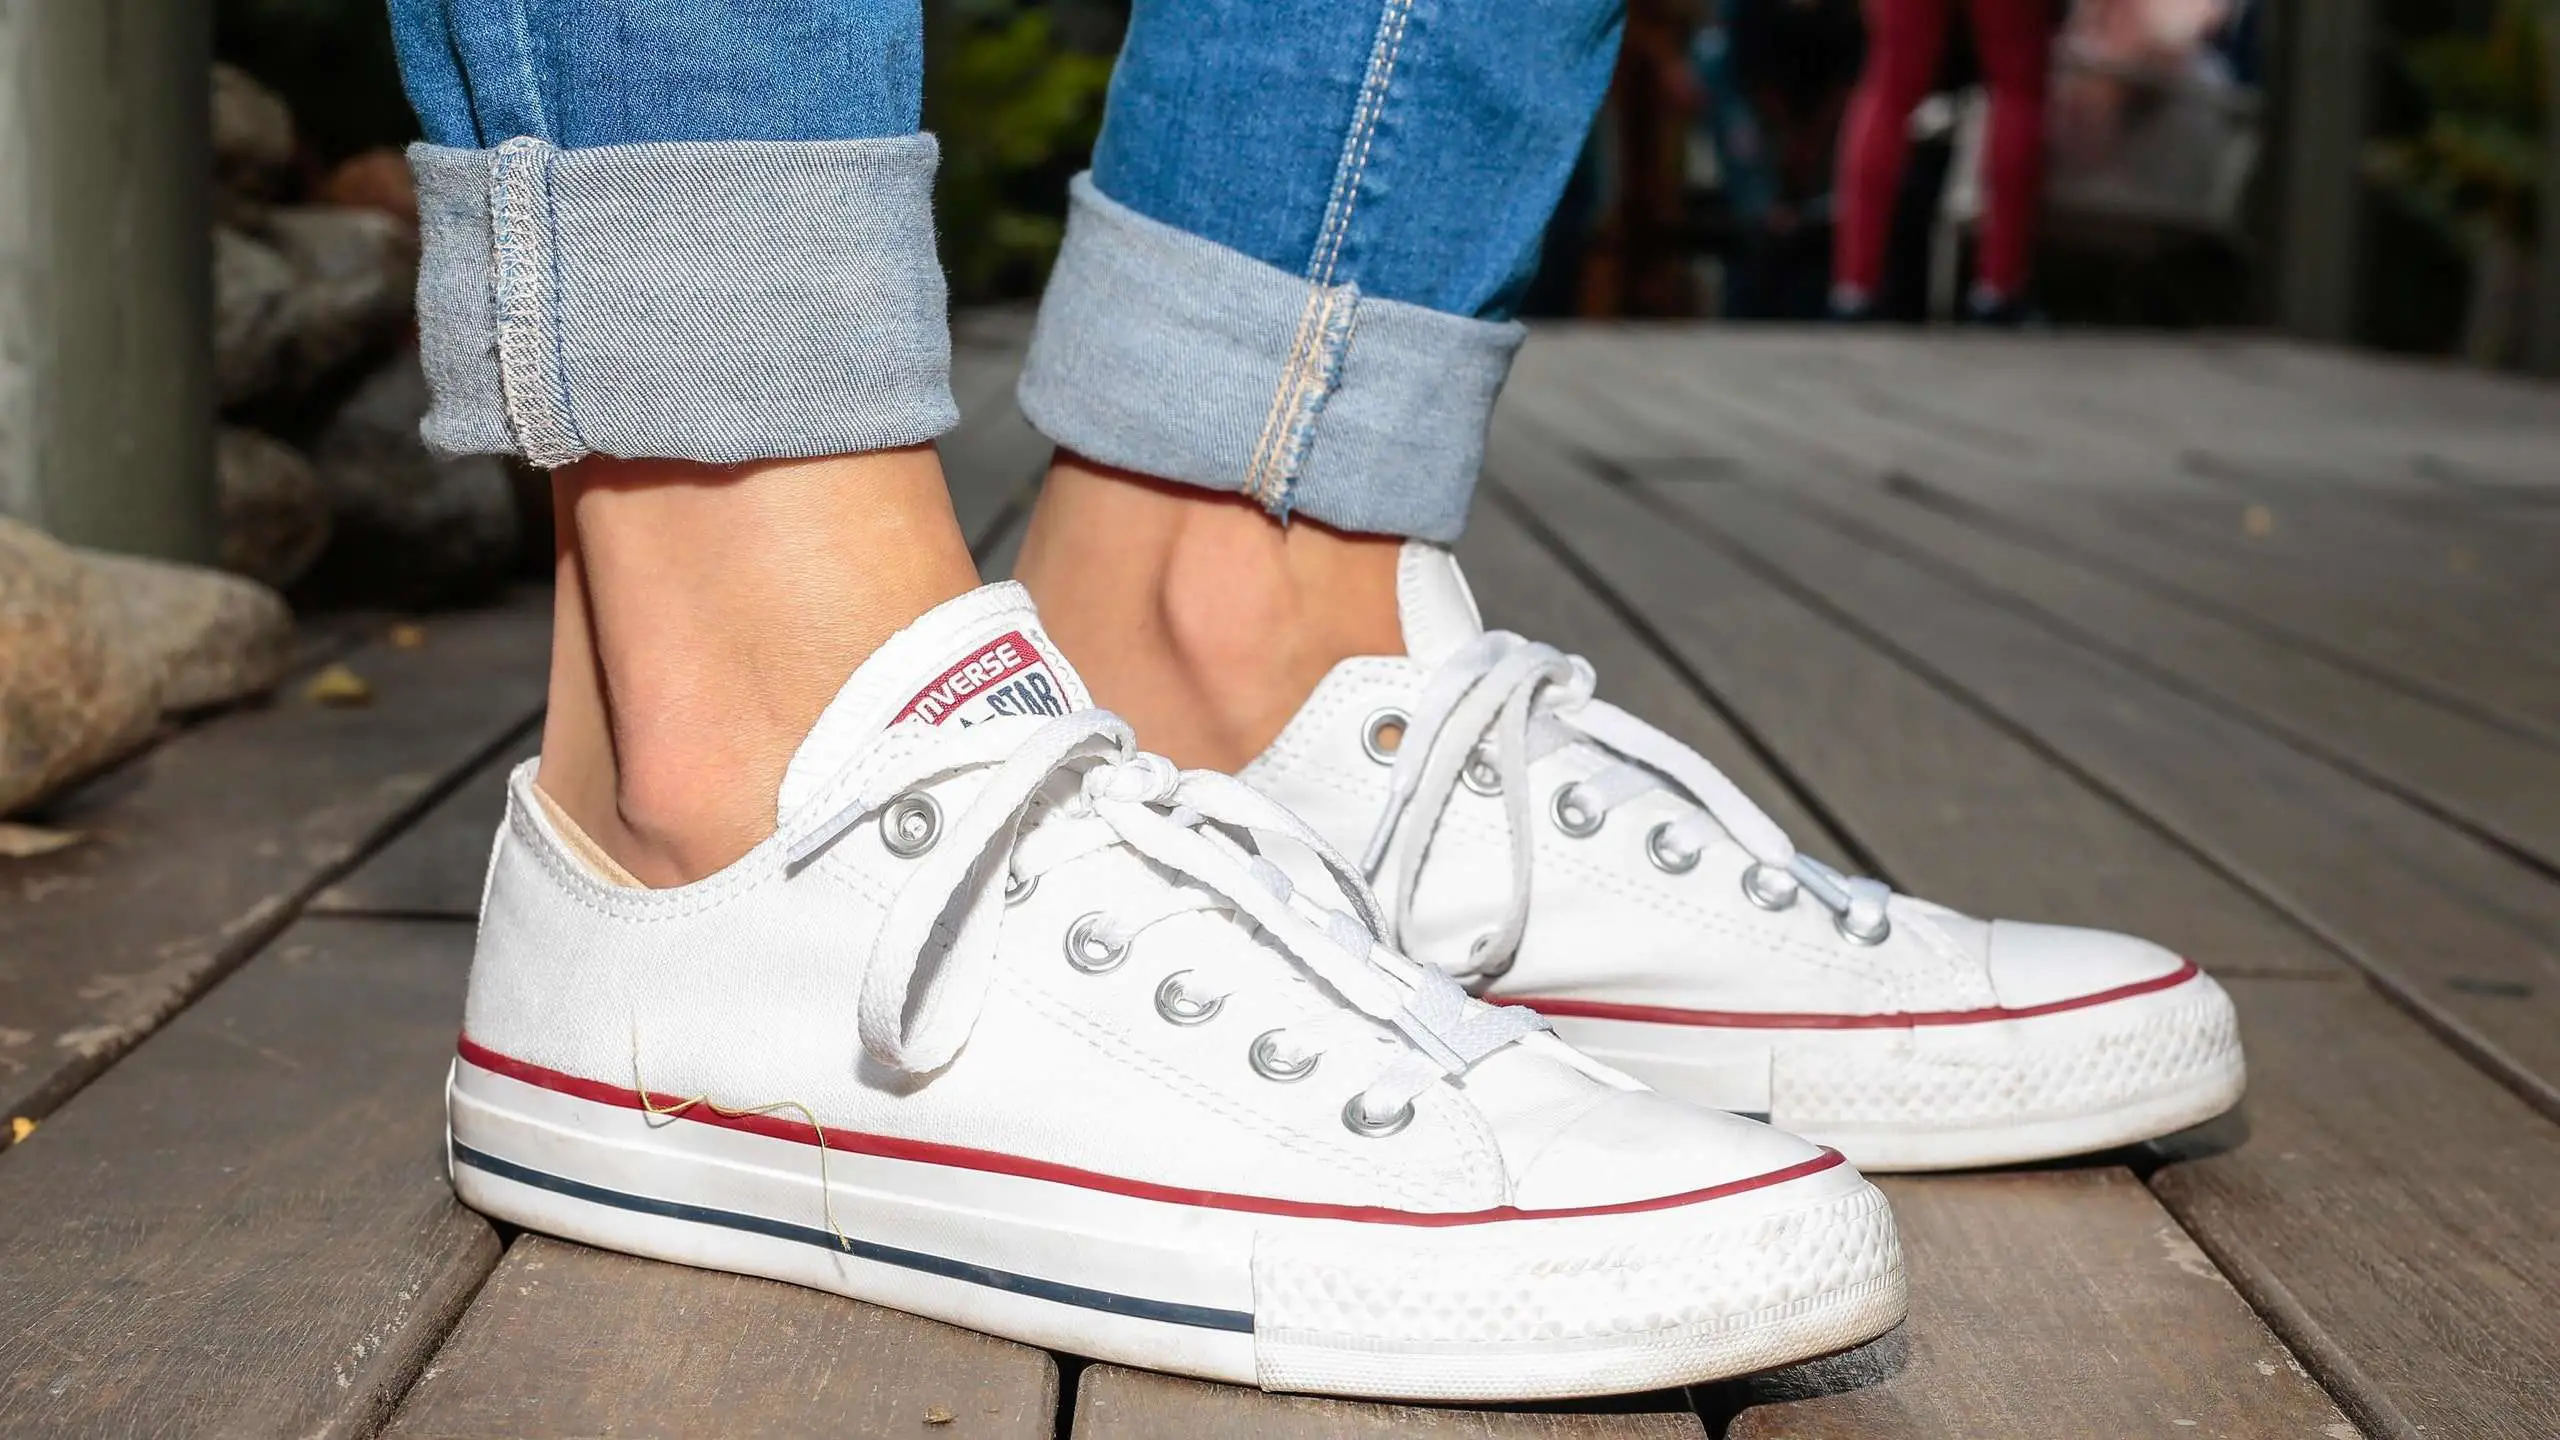 How to Clean White Sneakers the Right Way